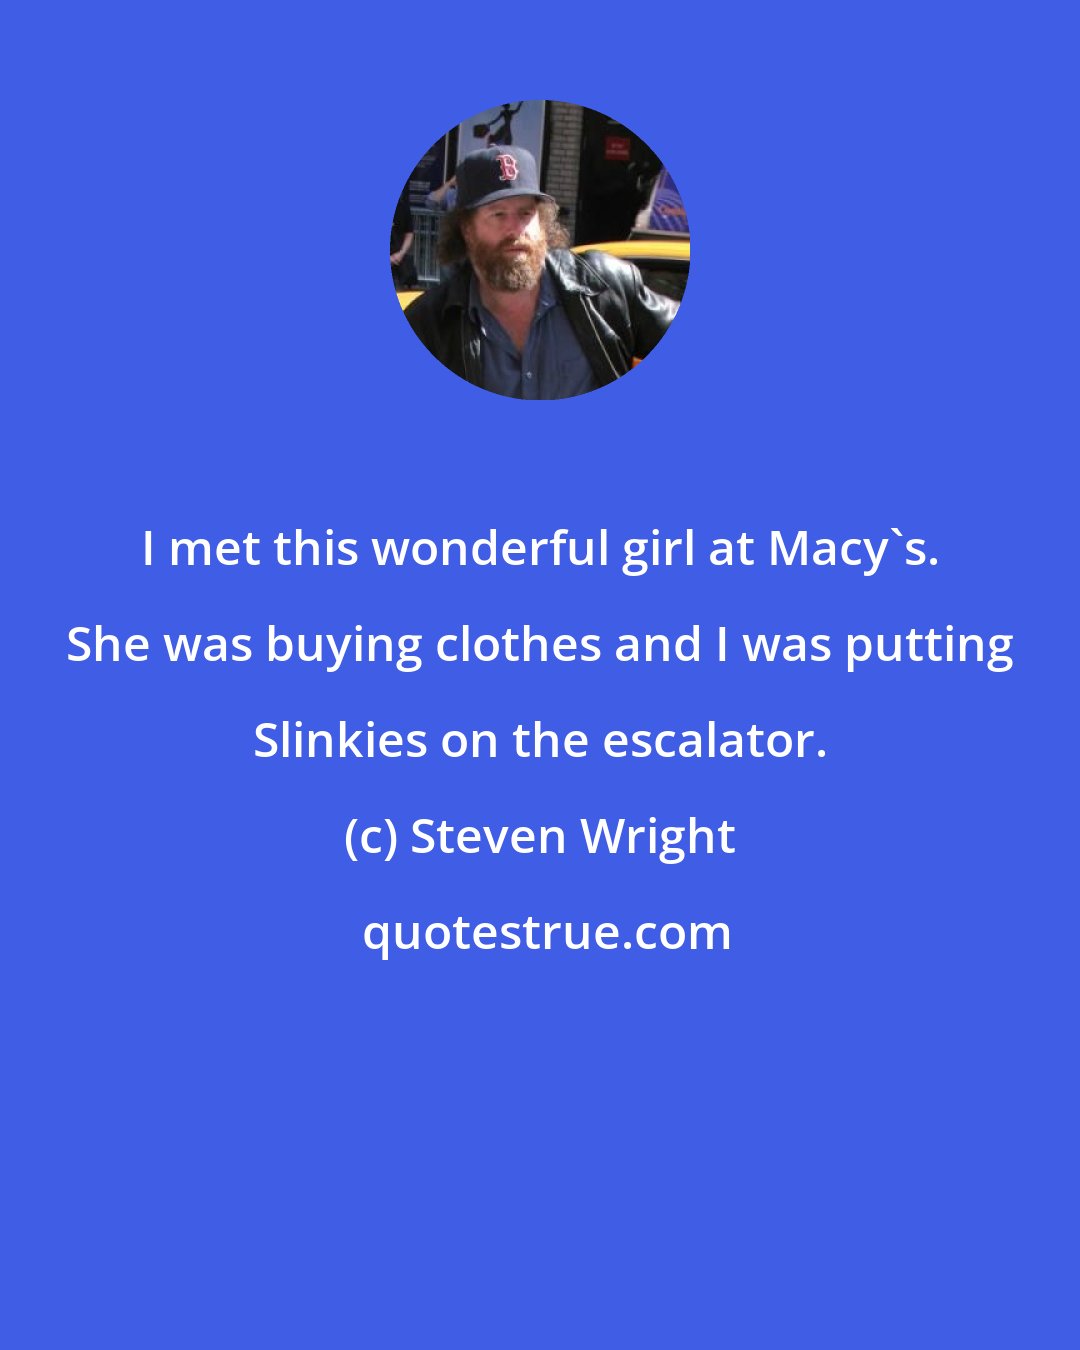 Steven Wright: I met this wonderful girl at Macy's. She was buying clothes and I was putting Slinkies on the escalator.